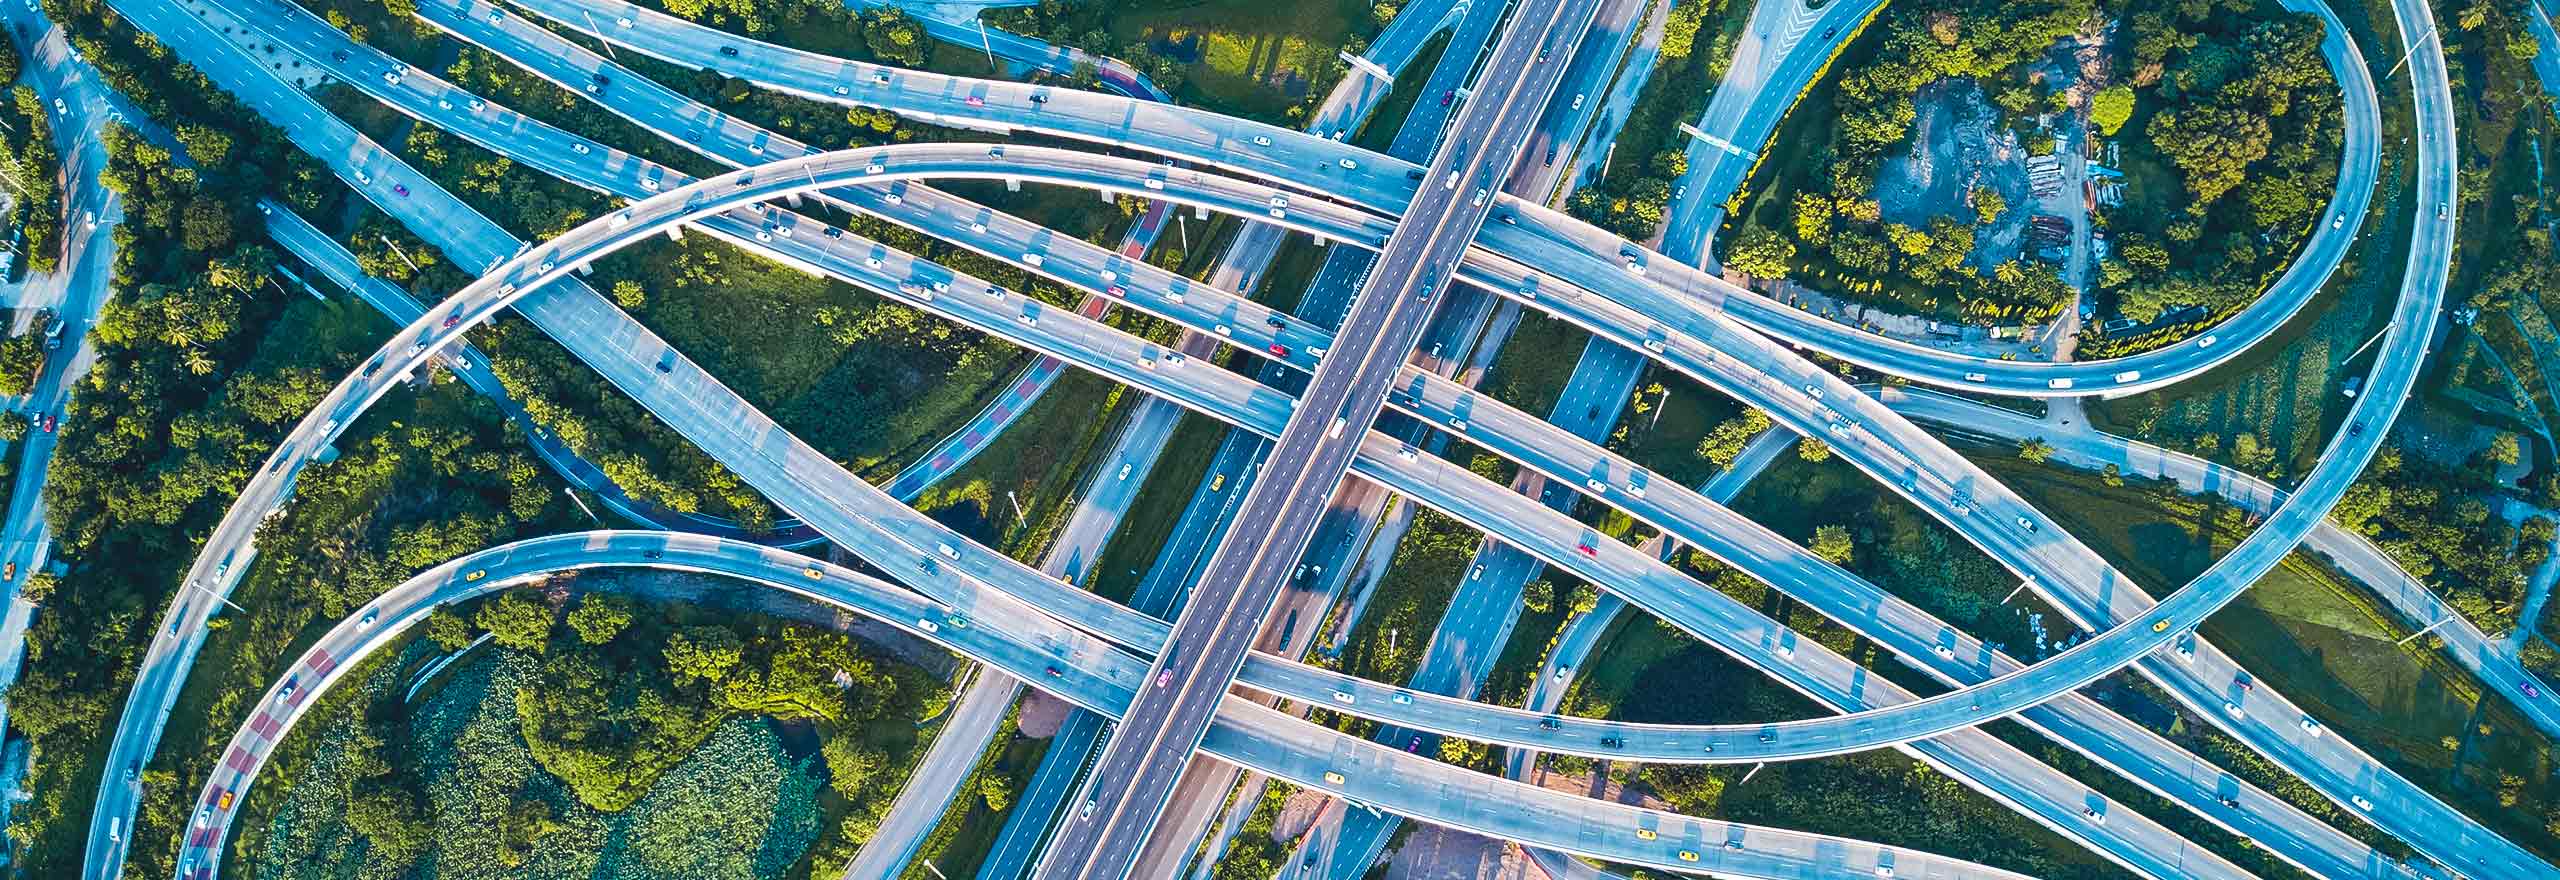 Aerial drone shot of road interchange or highway intersection with busy urban traffic speeding on the road